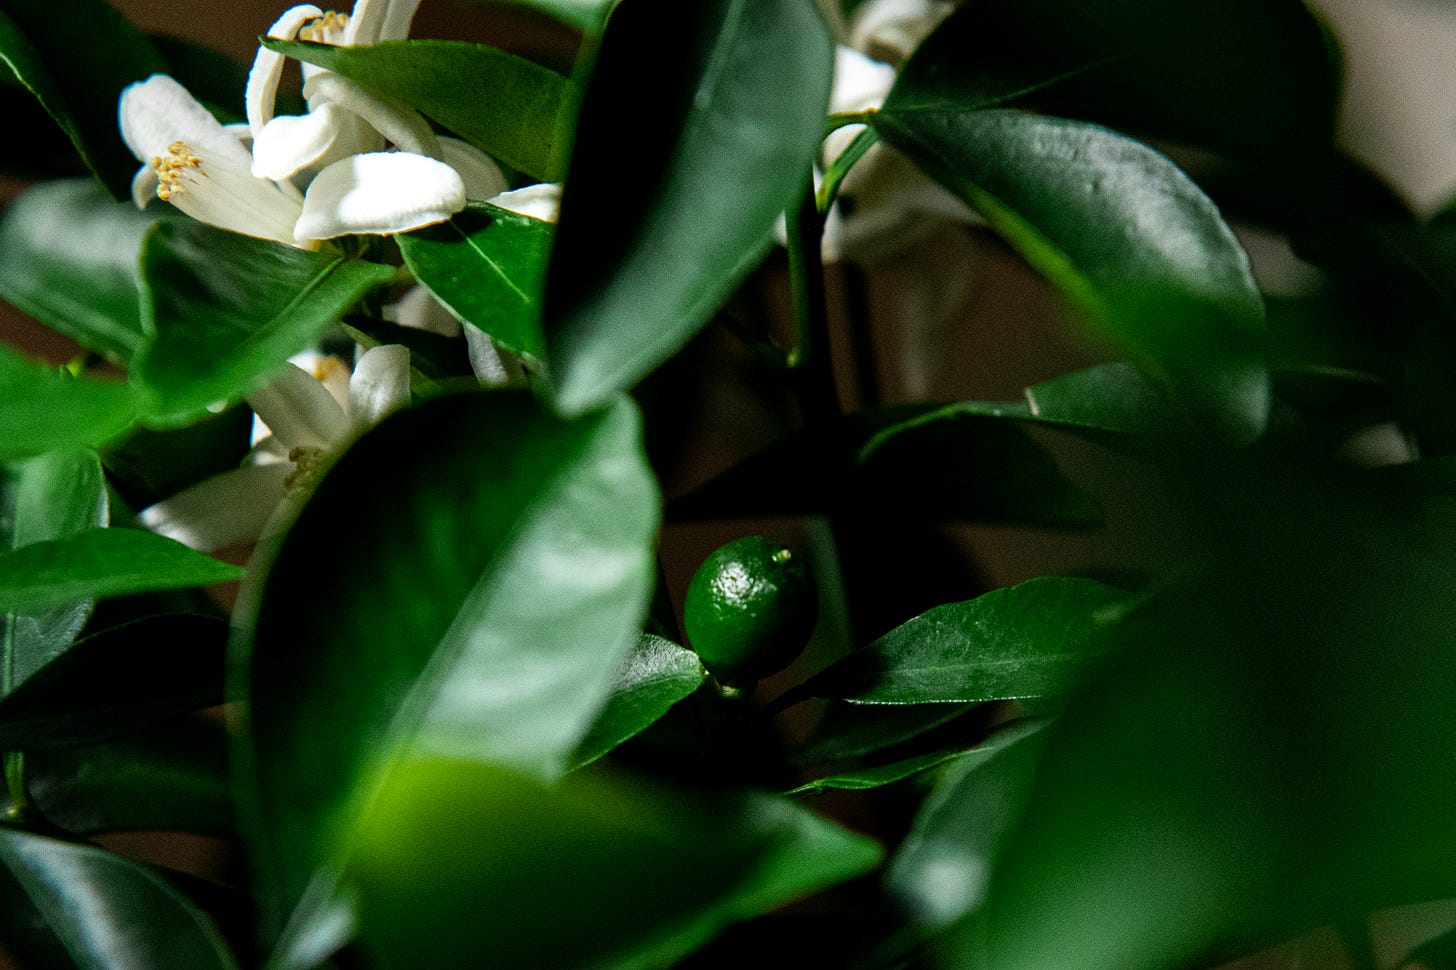 ID: Up close photo of small green calamansi fruit, still immature, growing on the tree